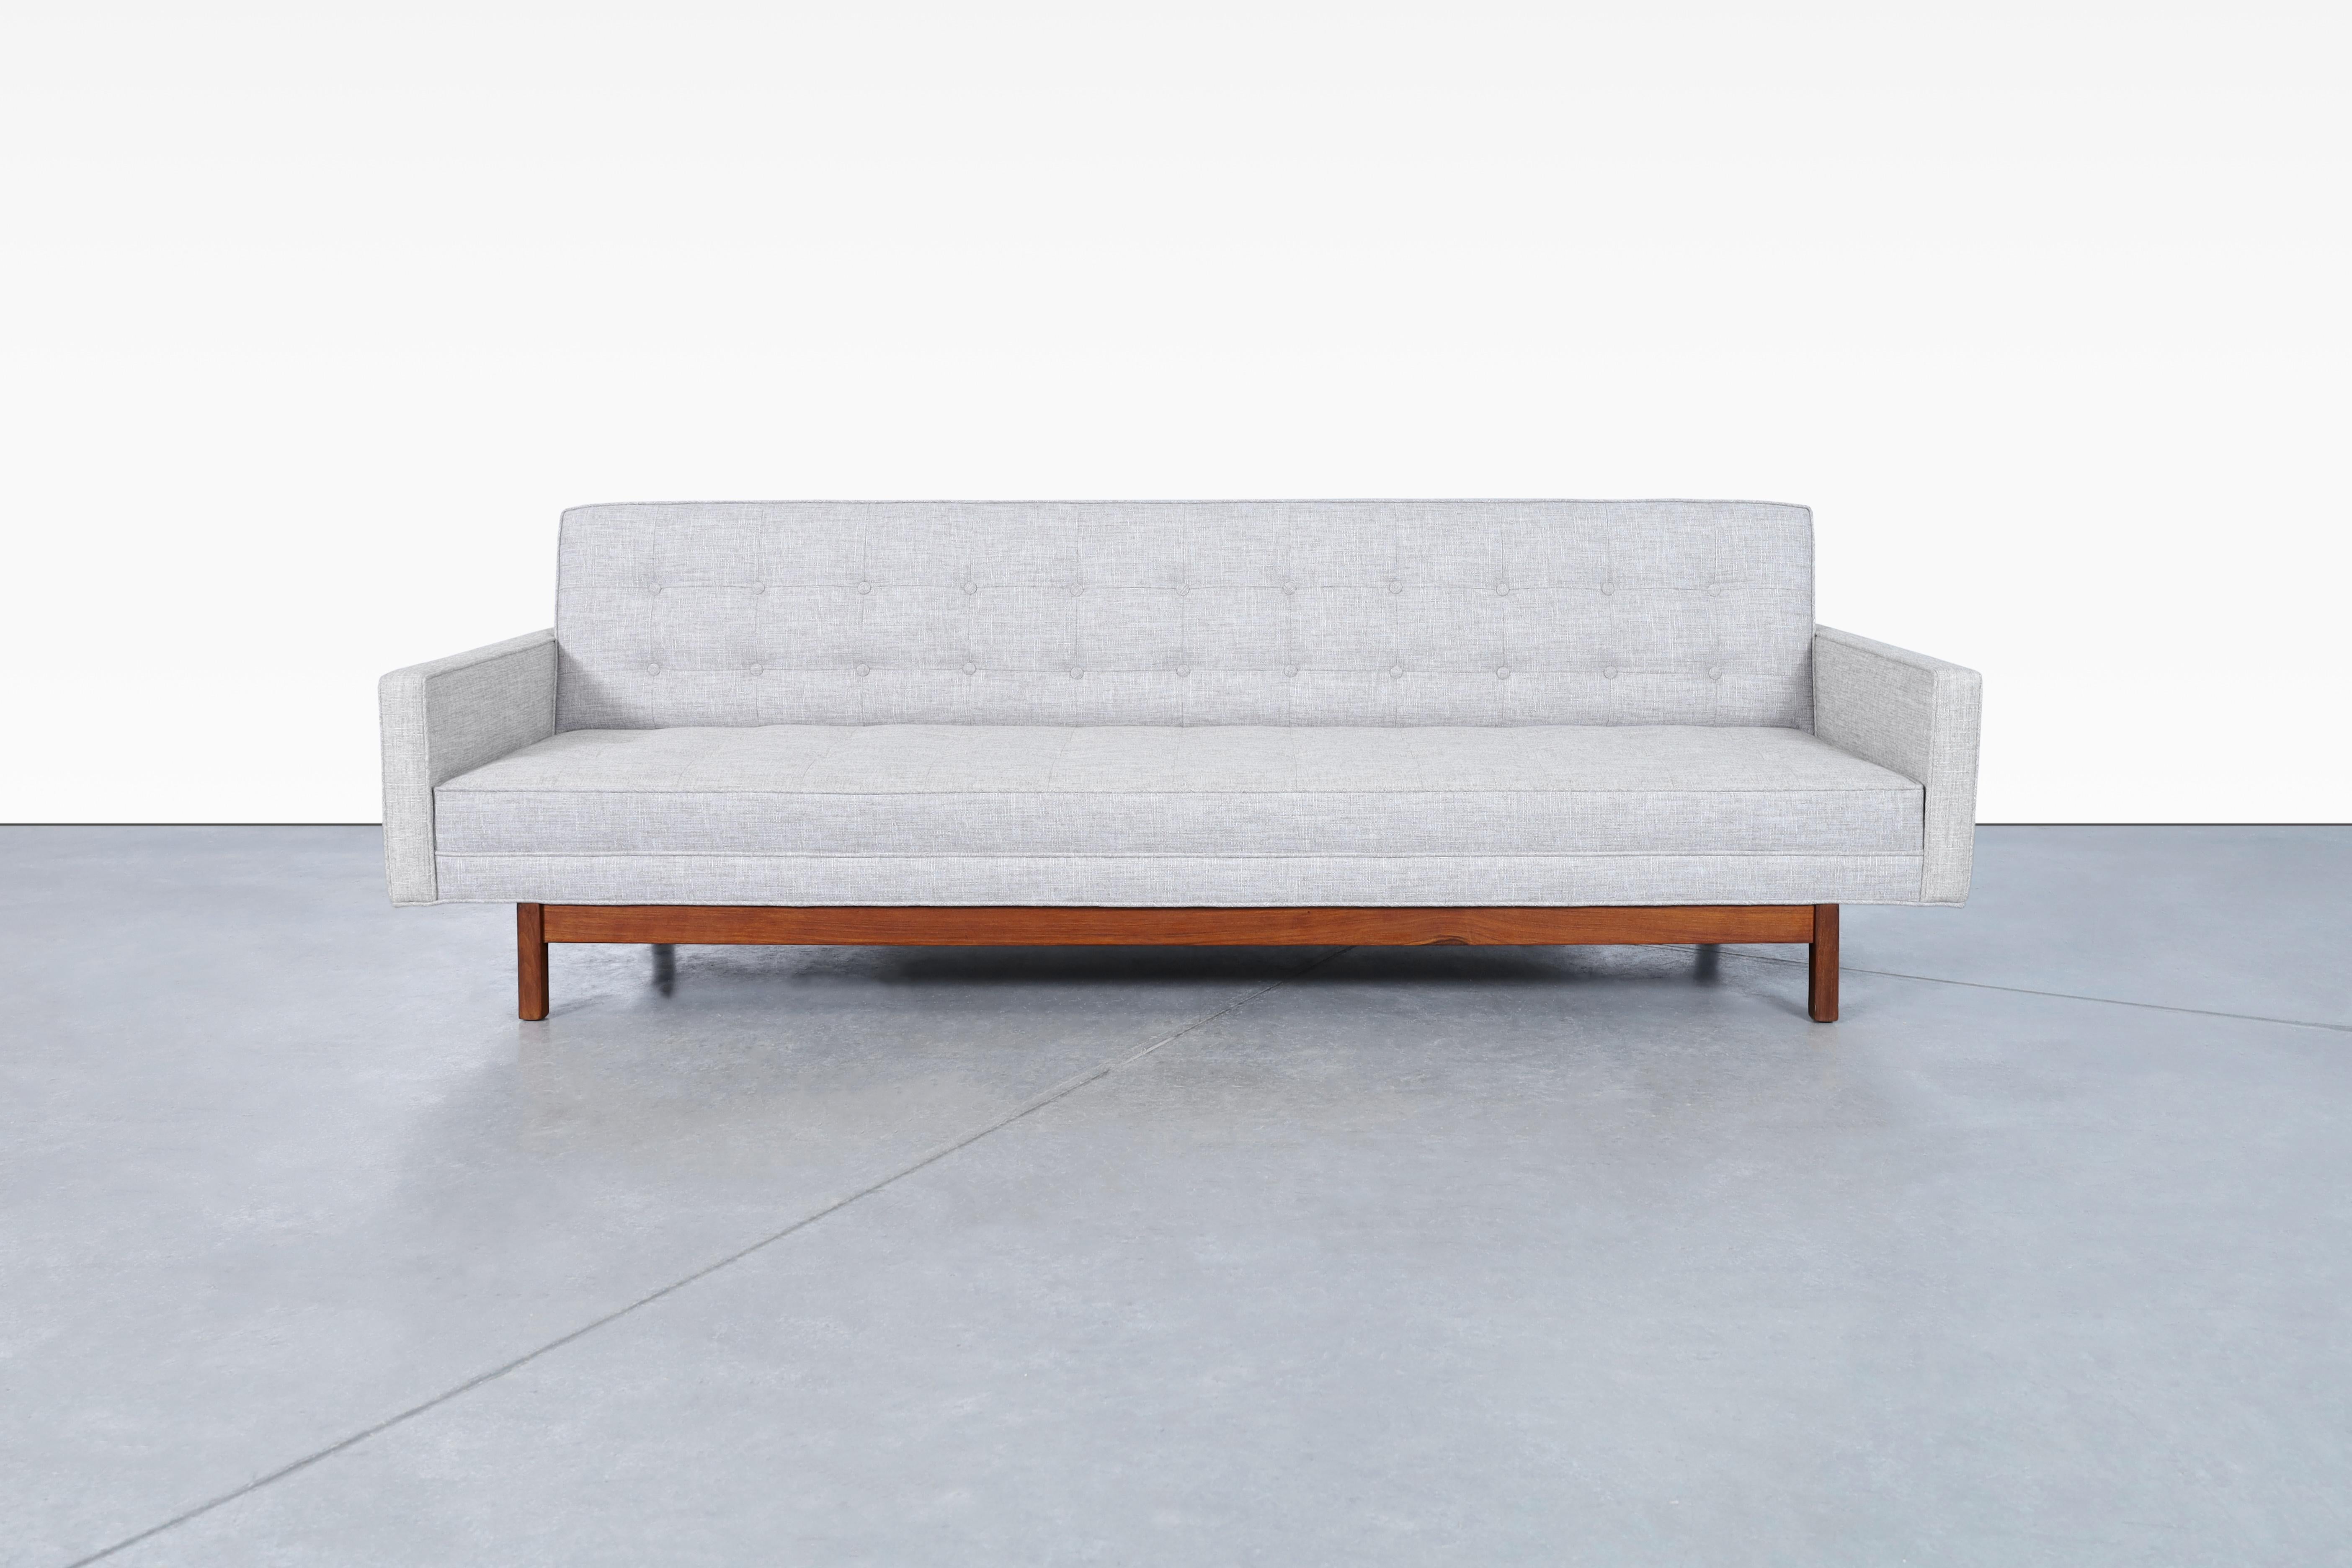 Exceptional Mid-Century Modern walnut sofa designed and manufactured in the United States, circa 1960s. This mid-century sofa is the ultimate combination of comfort and style. Our professional artisans have reupholstered this piece in a shade of